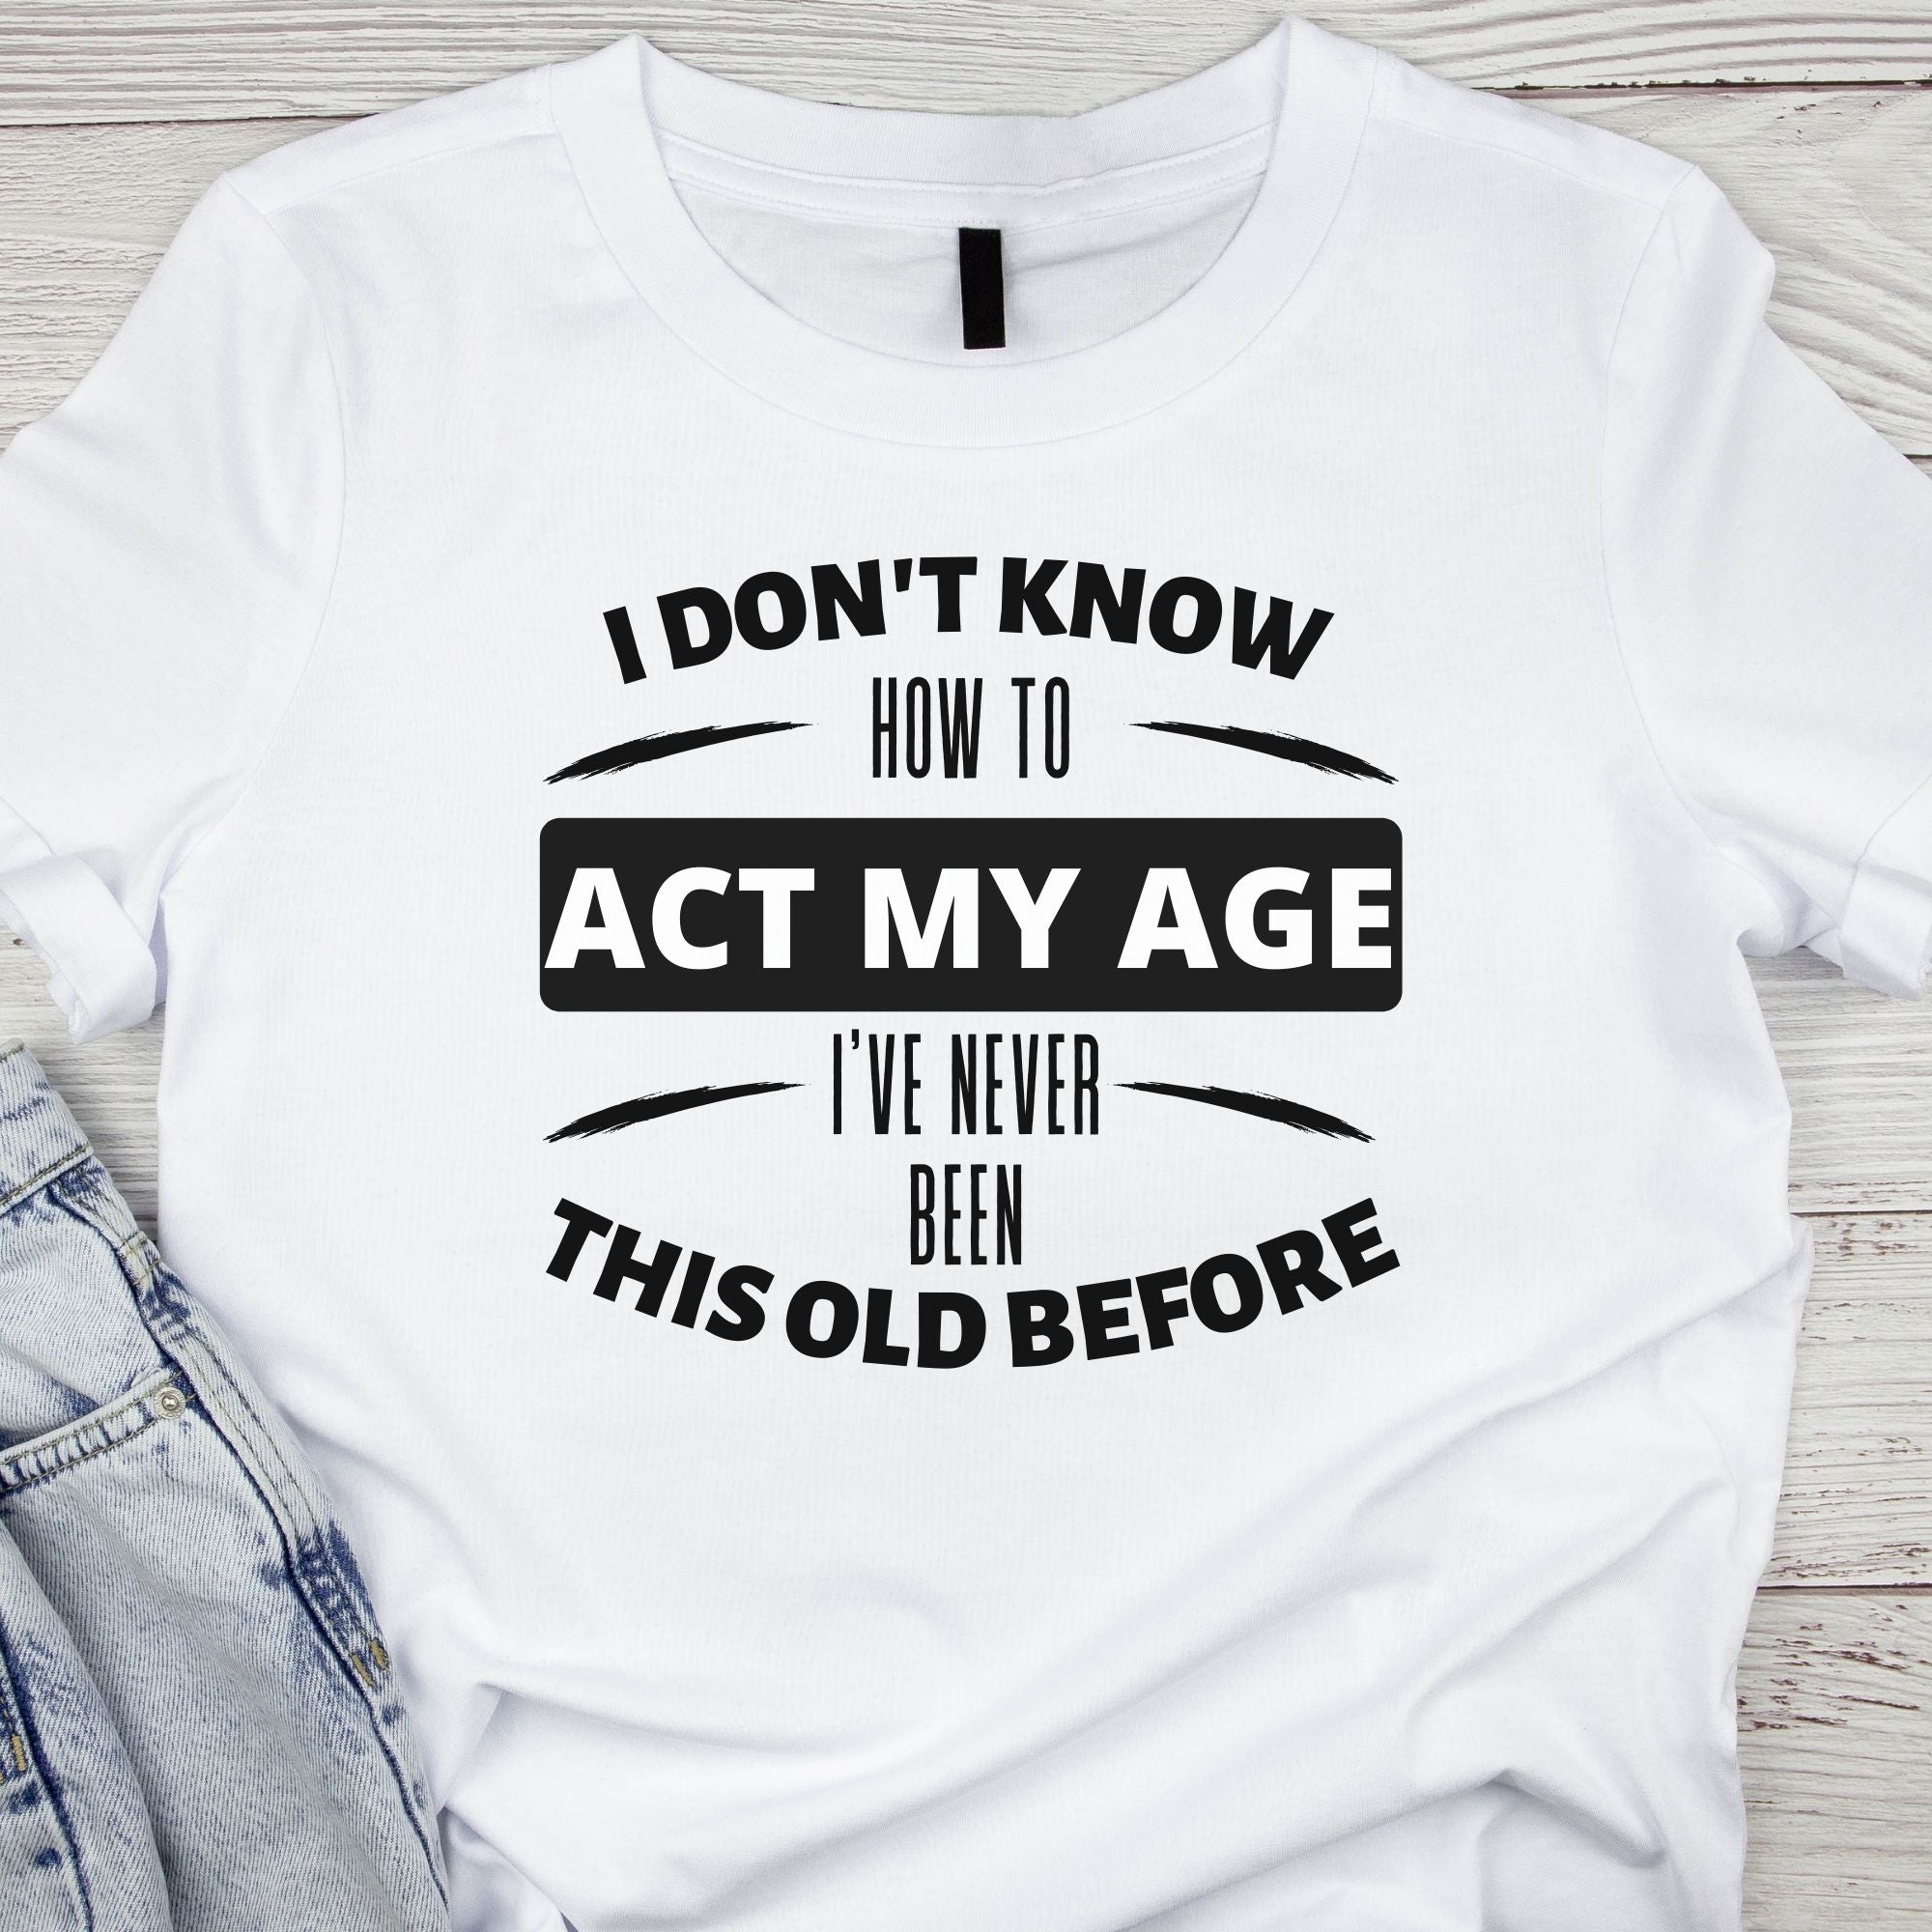 Funny Graphic Tee with "I don't know how to act my age, I've never been this old before" design on front of white cotton tshirt.